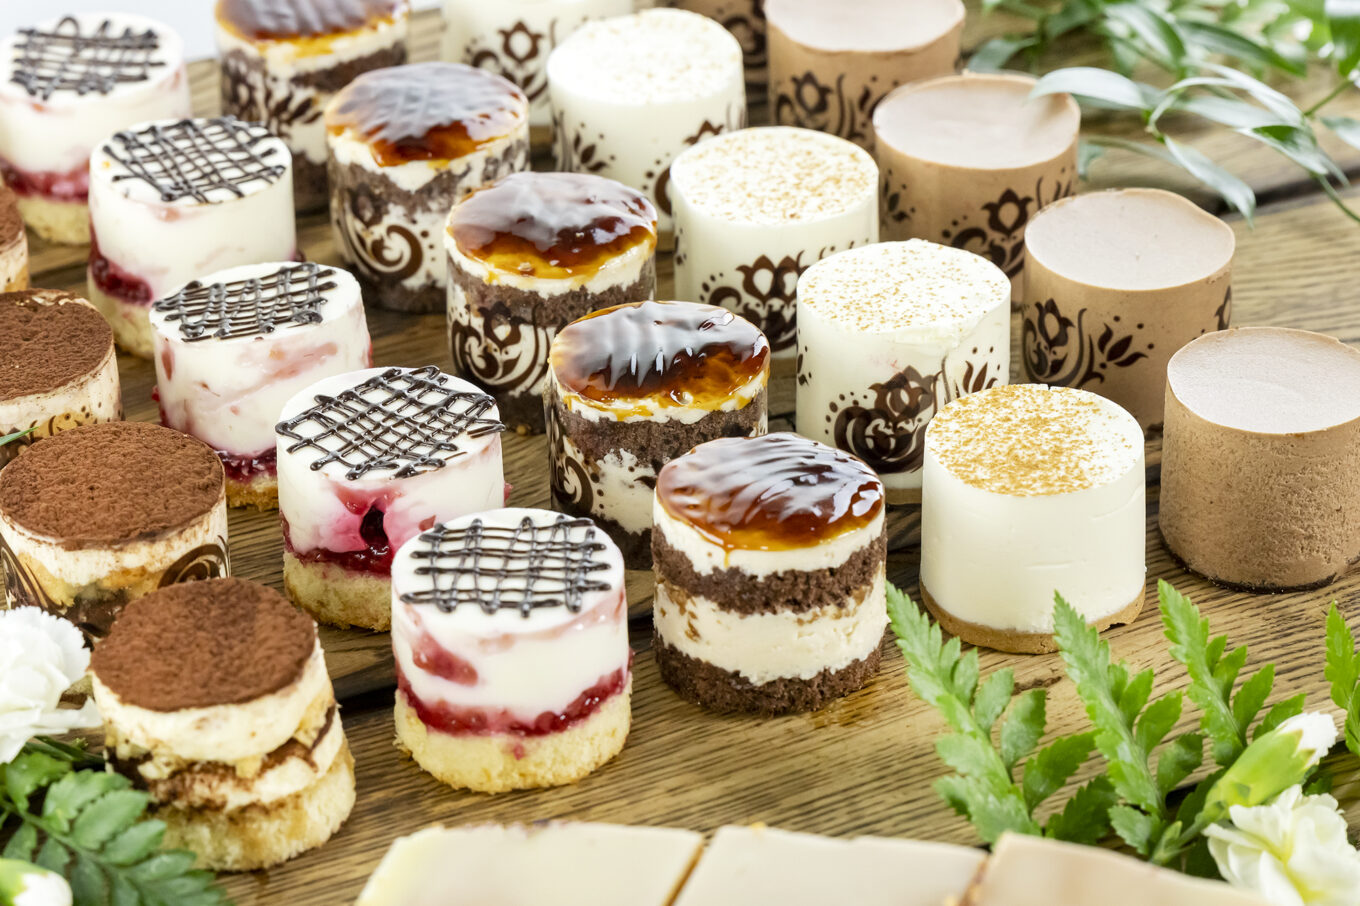 nano desserts Cukiernia Jacek Placek is synonymous with the taste of homemade cakes made from natural products.